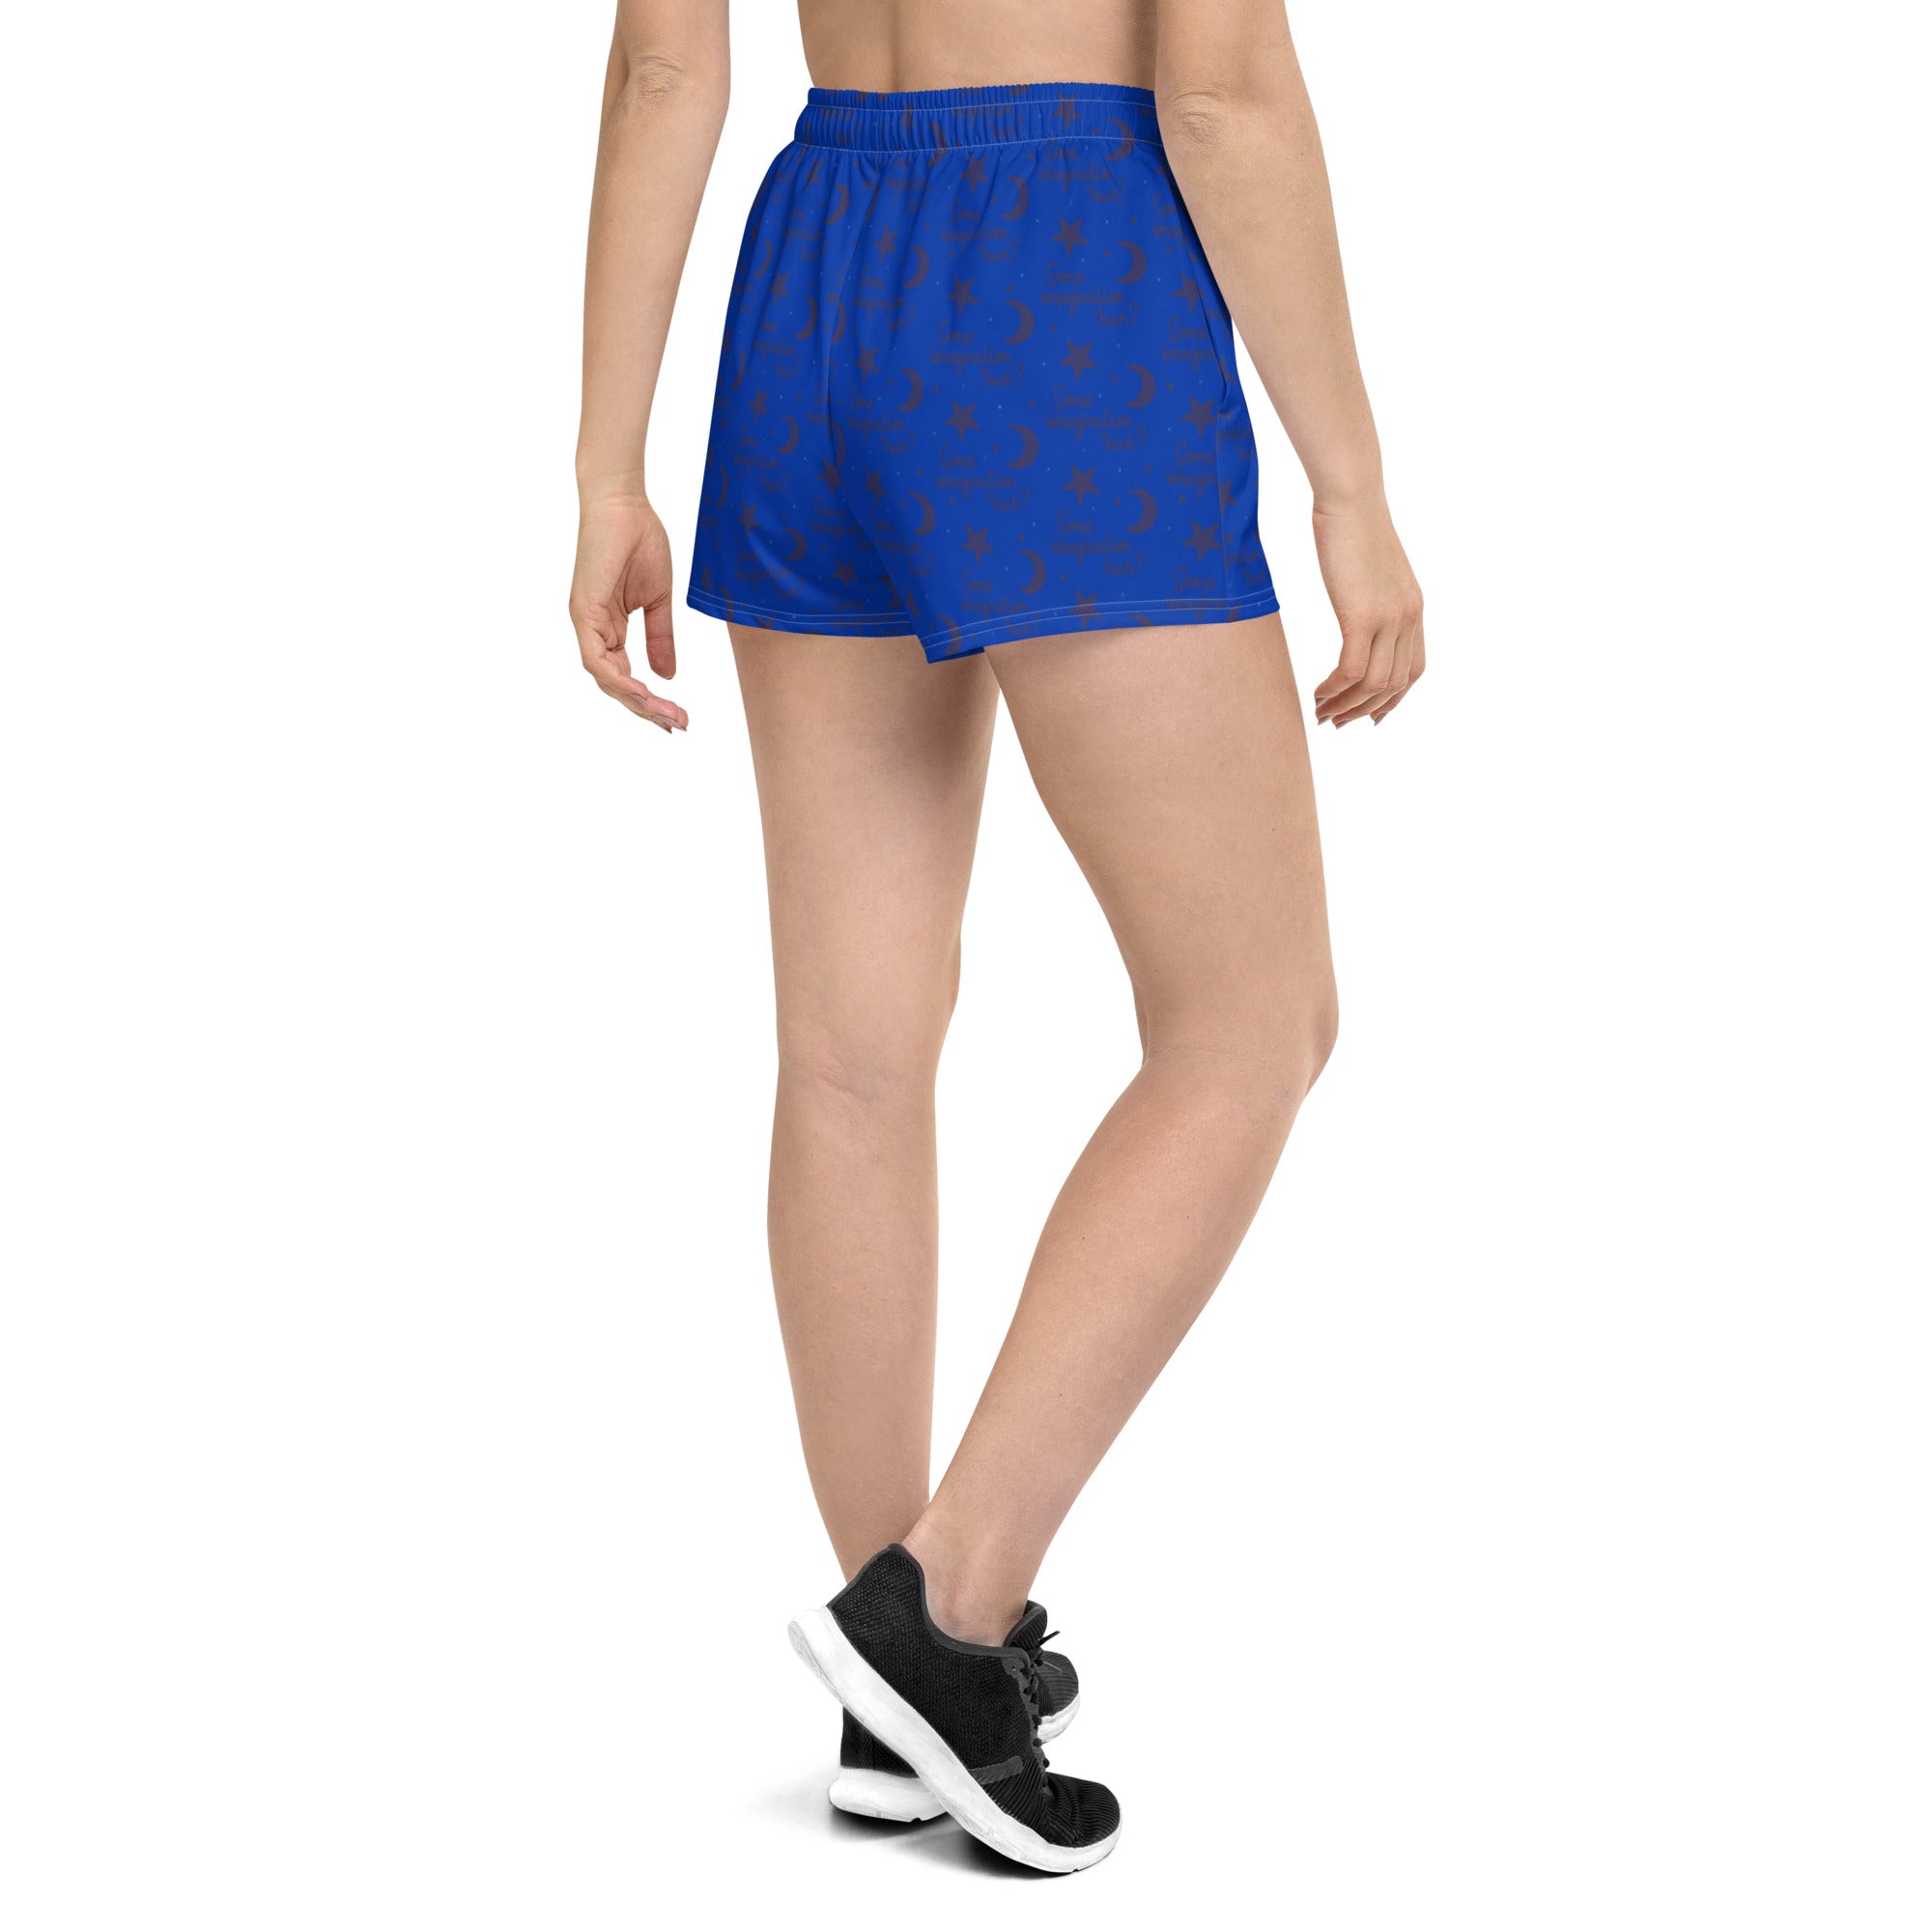 Some Imagination Women’s Recycled Athletic Shorts